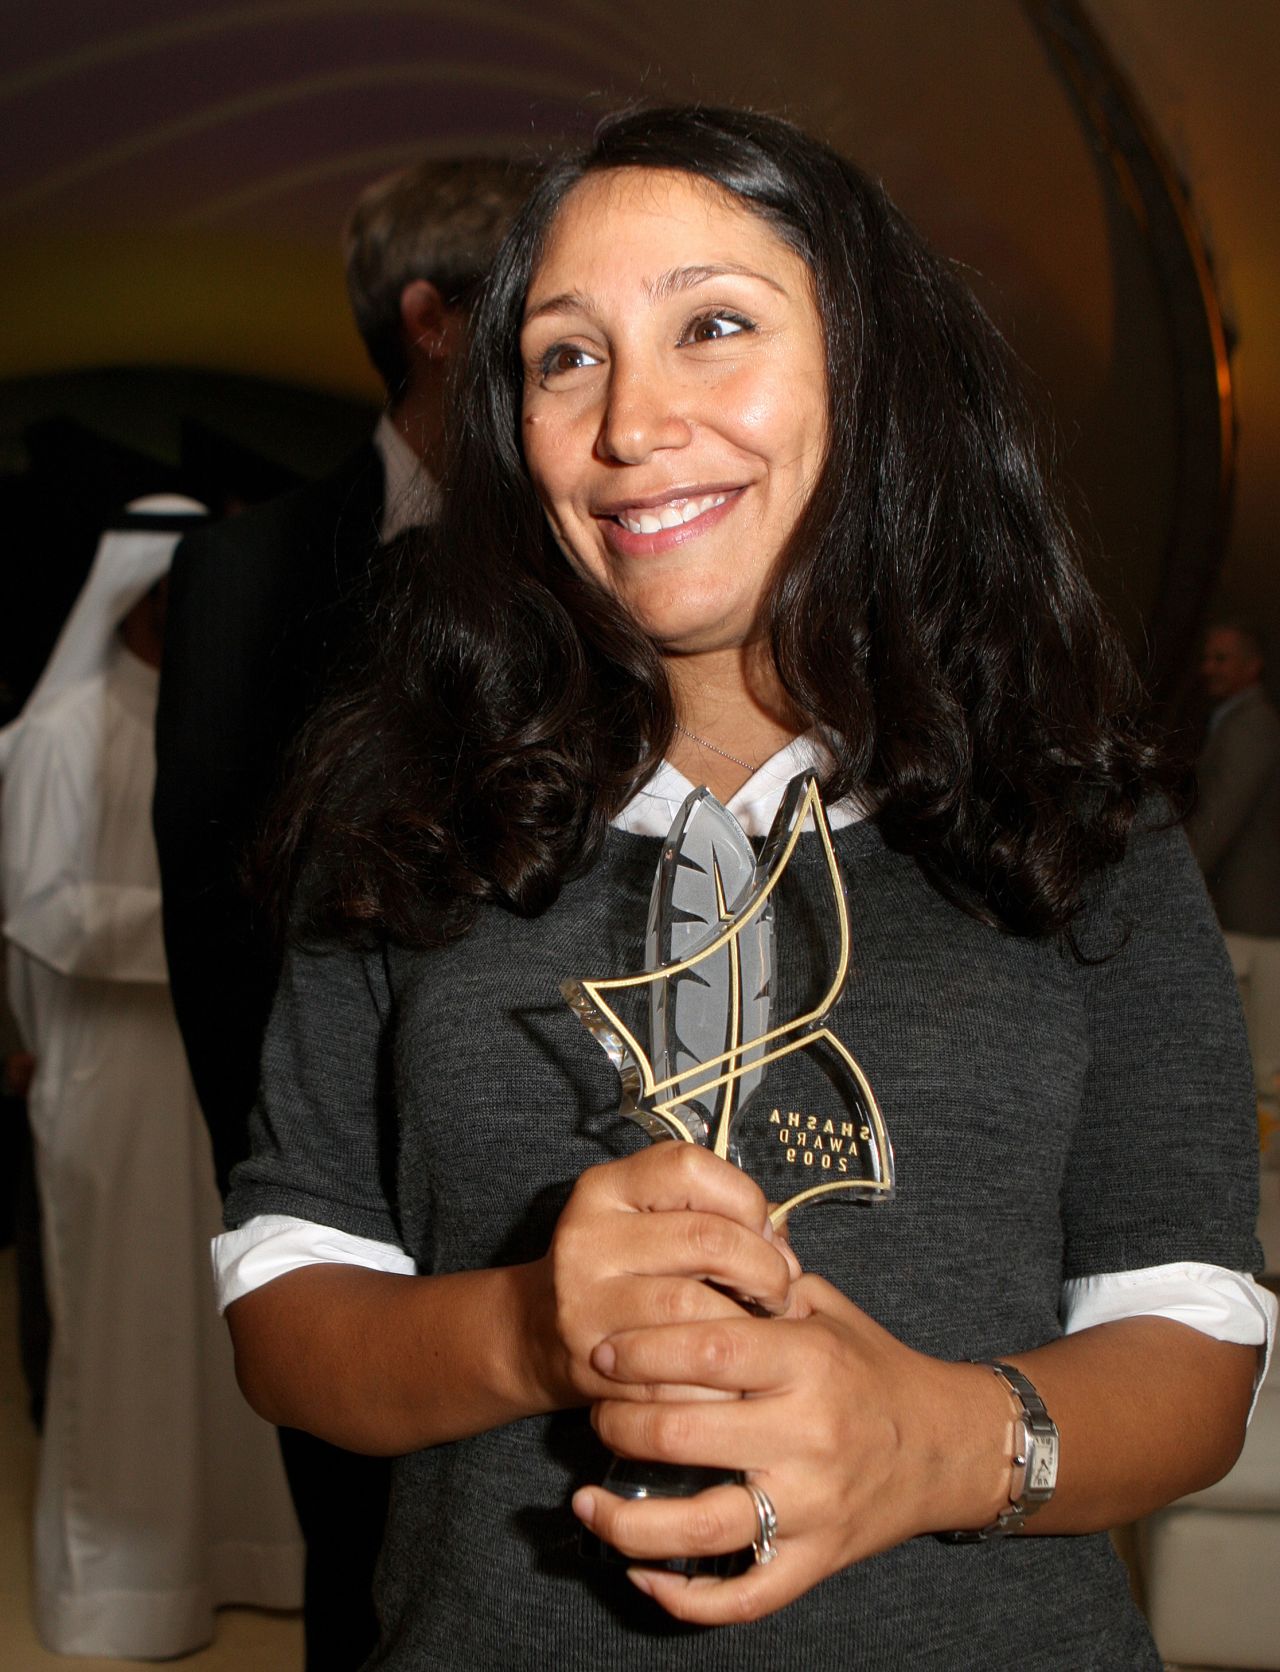 Al Mansour holds her trophy after winning the Shasha Grant, worth $100,000, for the Wajda screenplay, in 2009. The Shasha Feature Film Screenwriting Competition is run by the Abu Dhabi Film Commission, and is open to scriptwriters who are from the Middle East, or have Middle Eastern parents. 